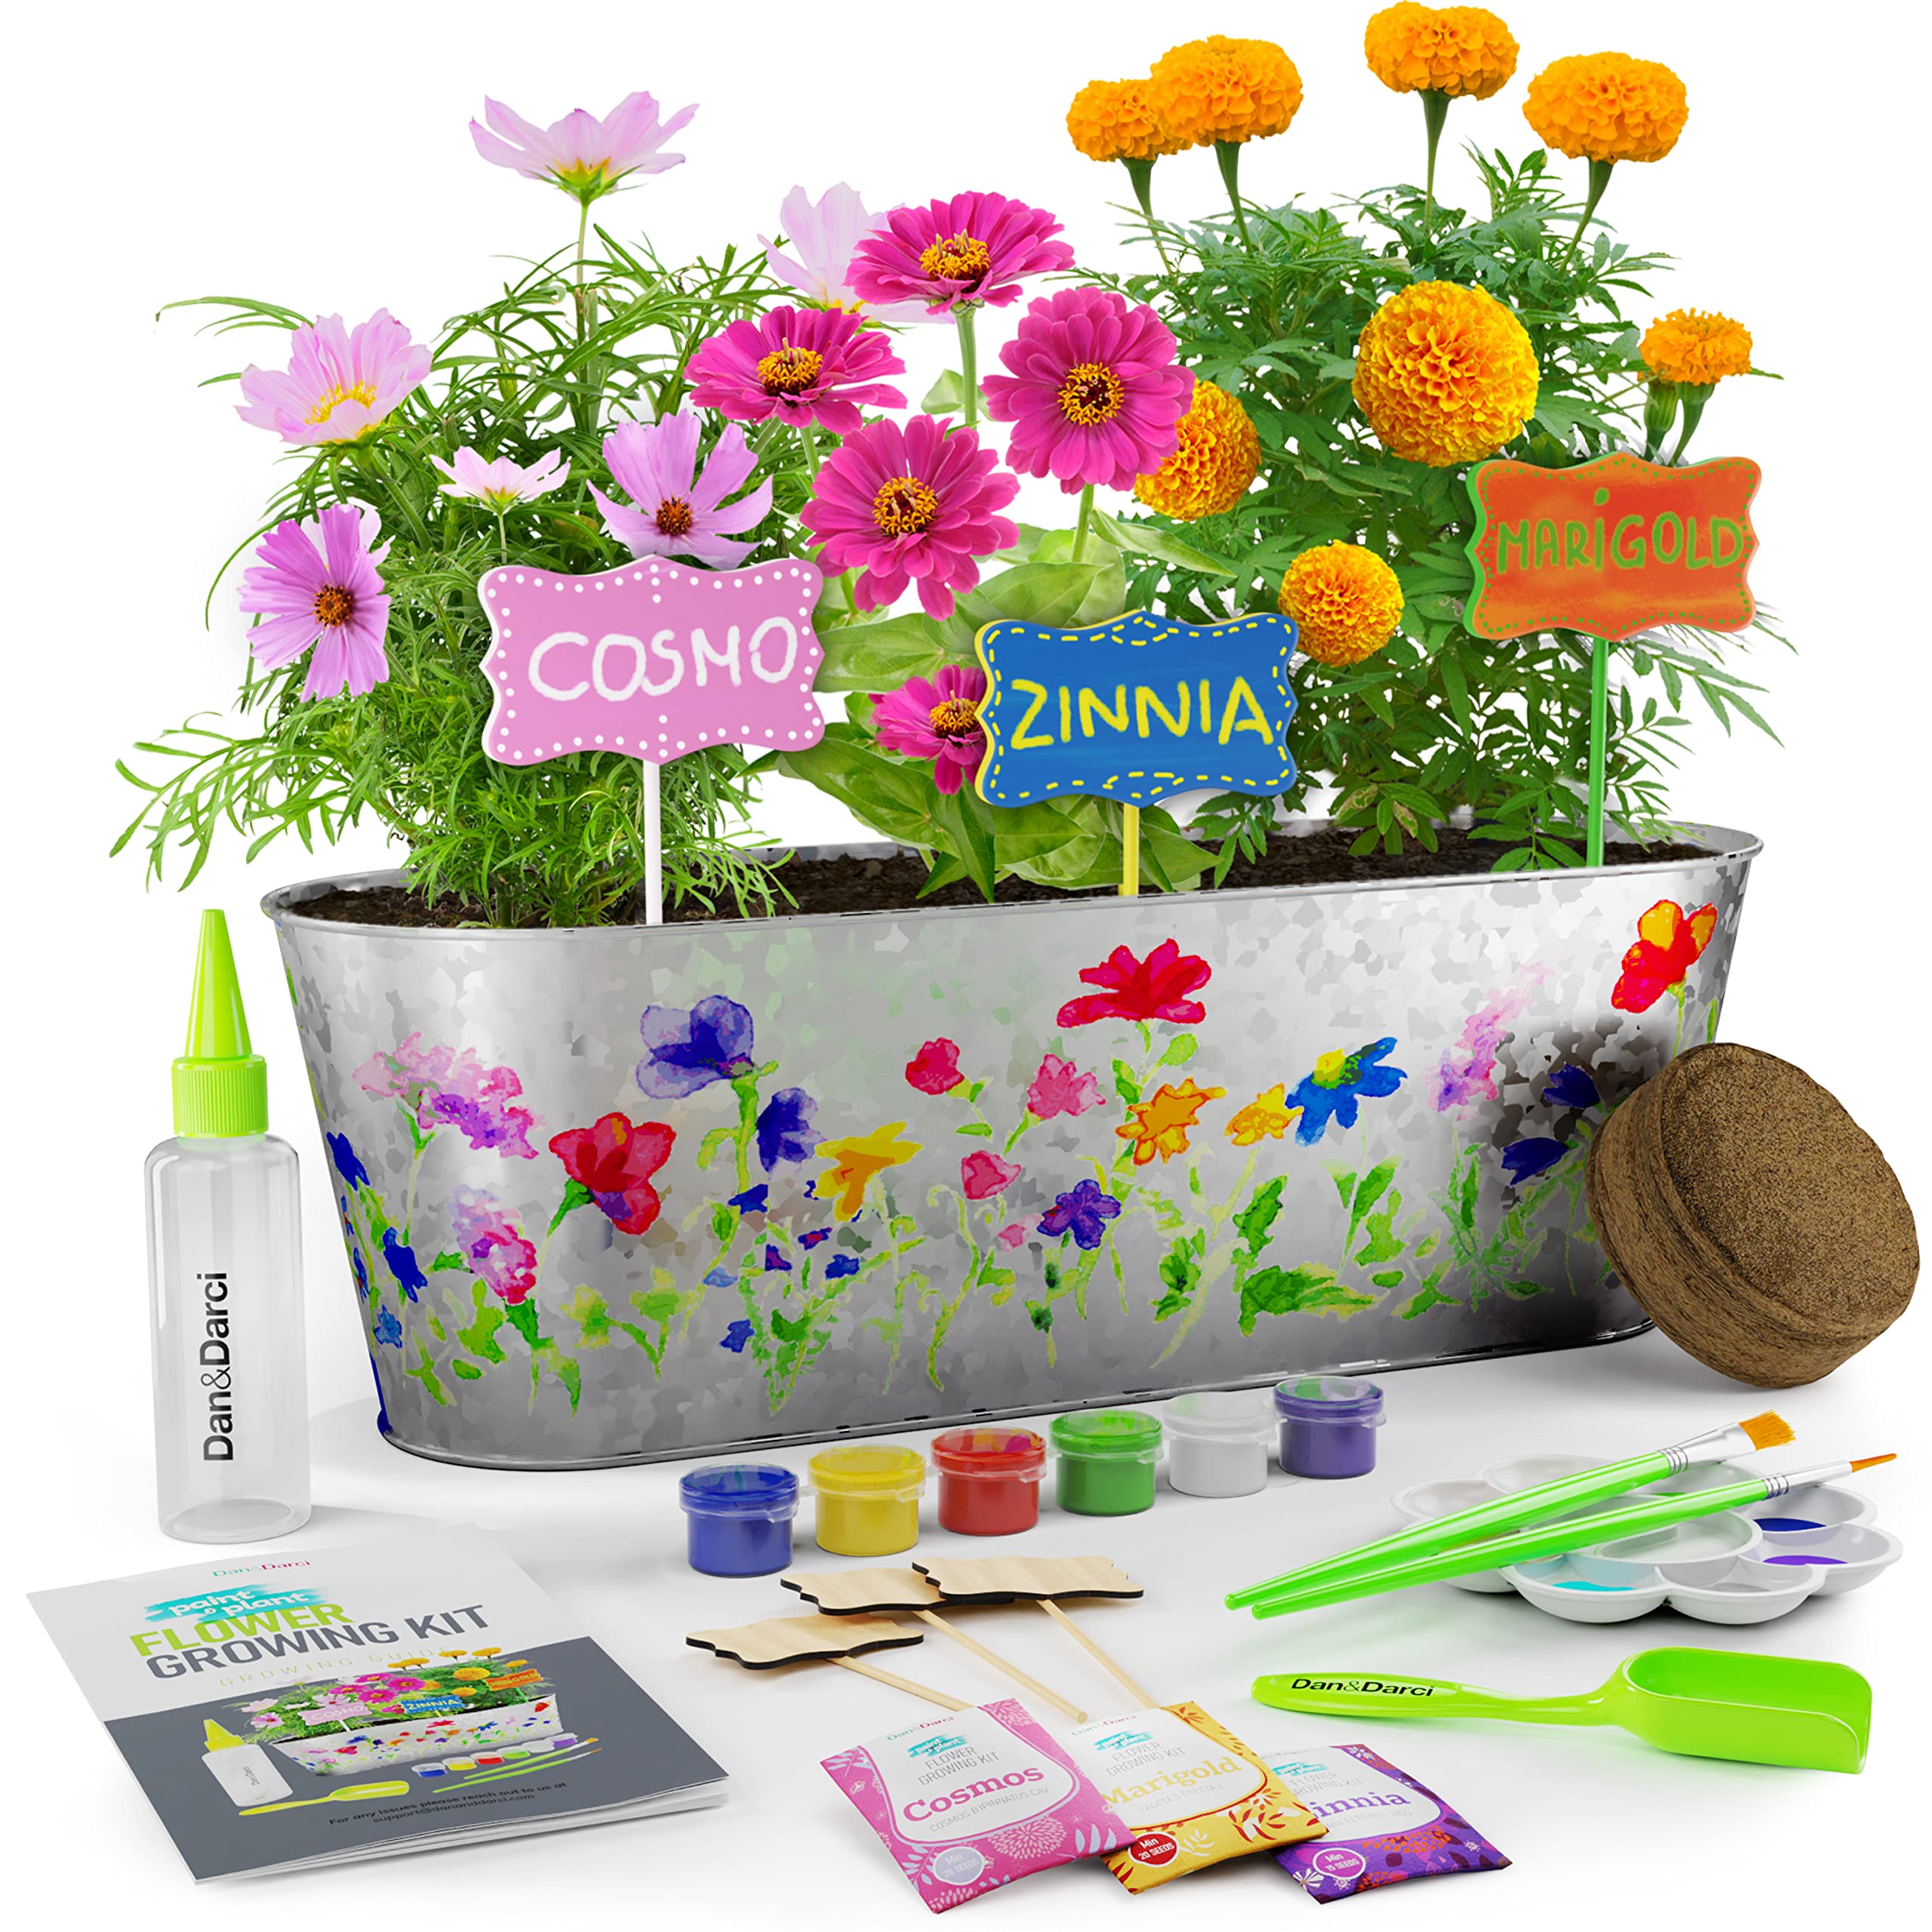 Dan&Darci Paint & Plant Flower Craft Kit for Kids - Best Birthday Crafts Gifts for Girls & Boys Age 5 6 7 8-12 Year Old Girl Gift - Children Gardening Kits, Art Projects Toys for Ages 5-12 Years